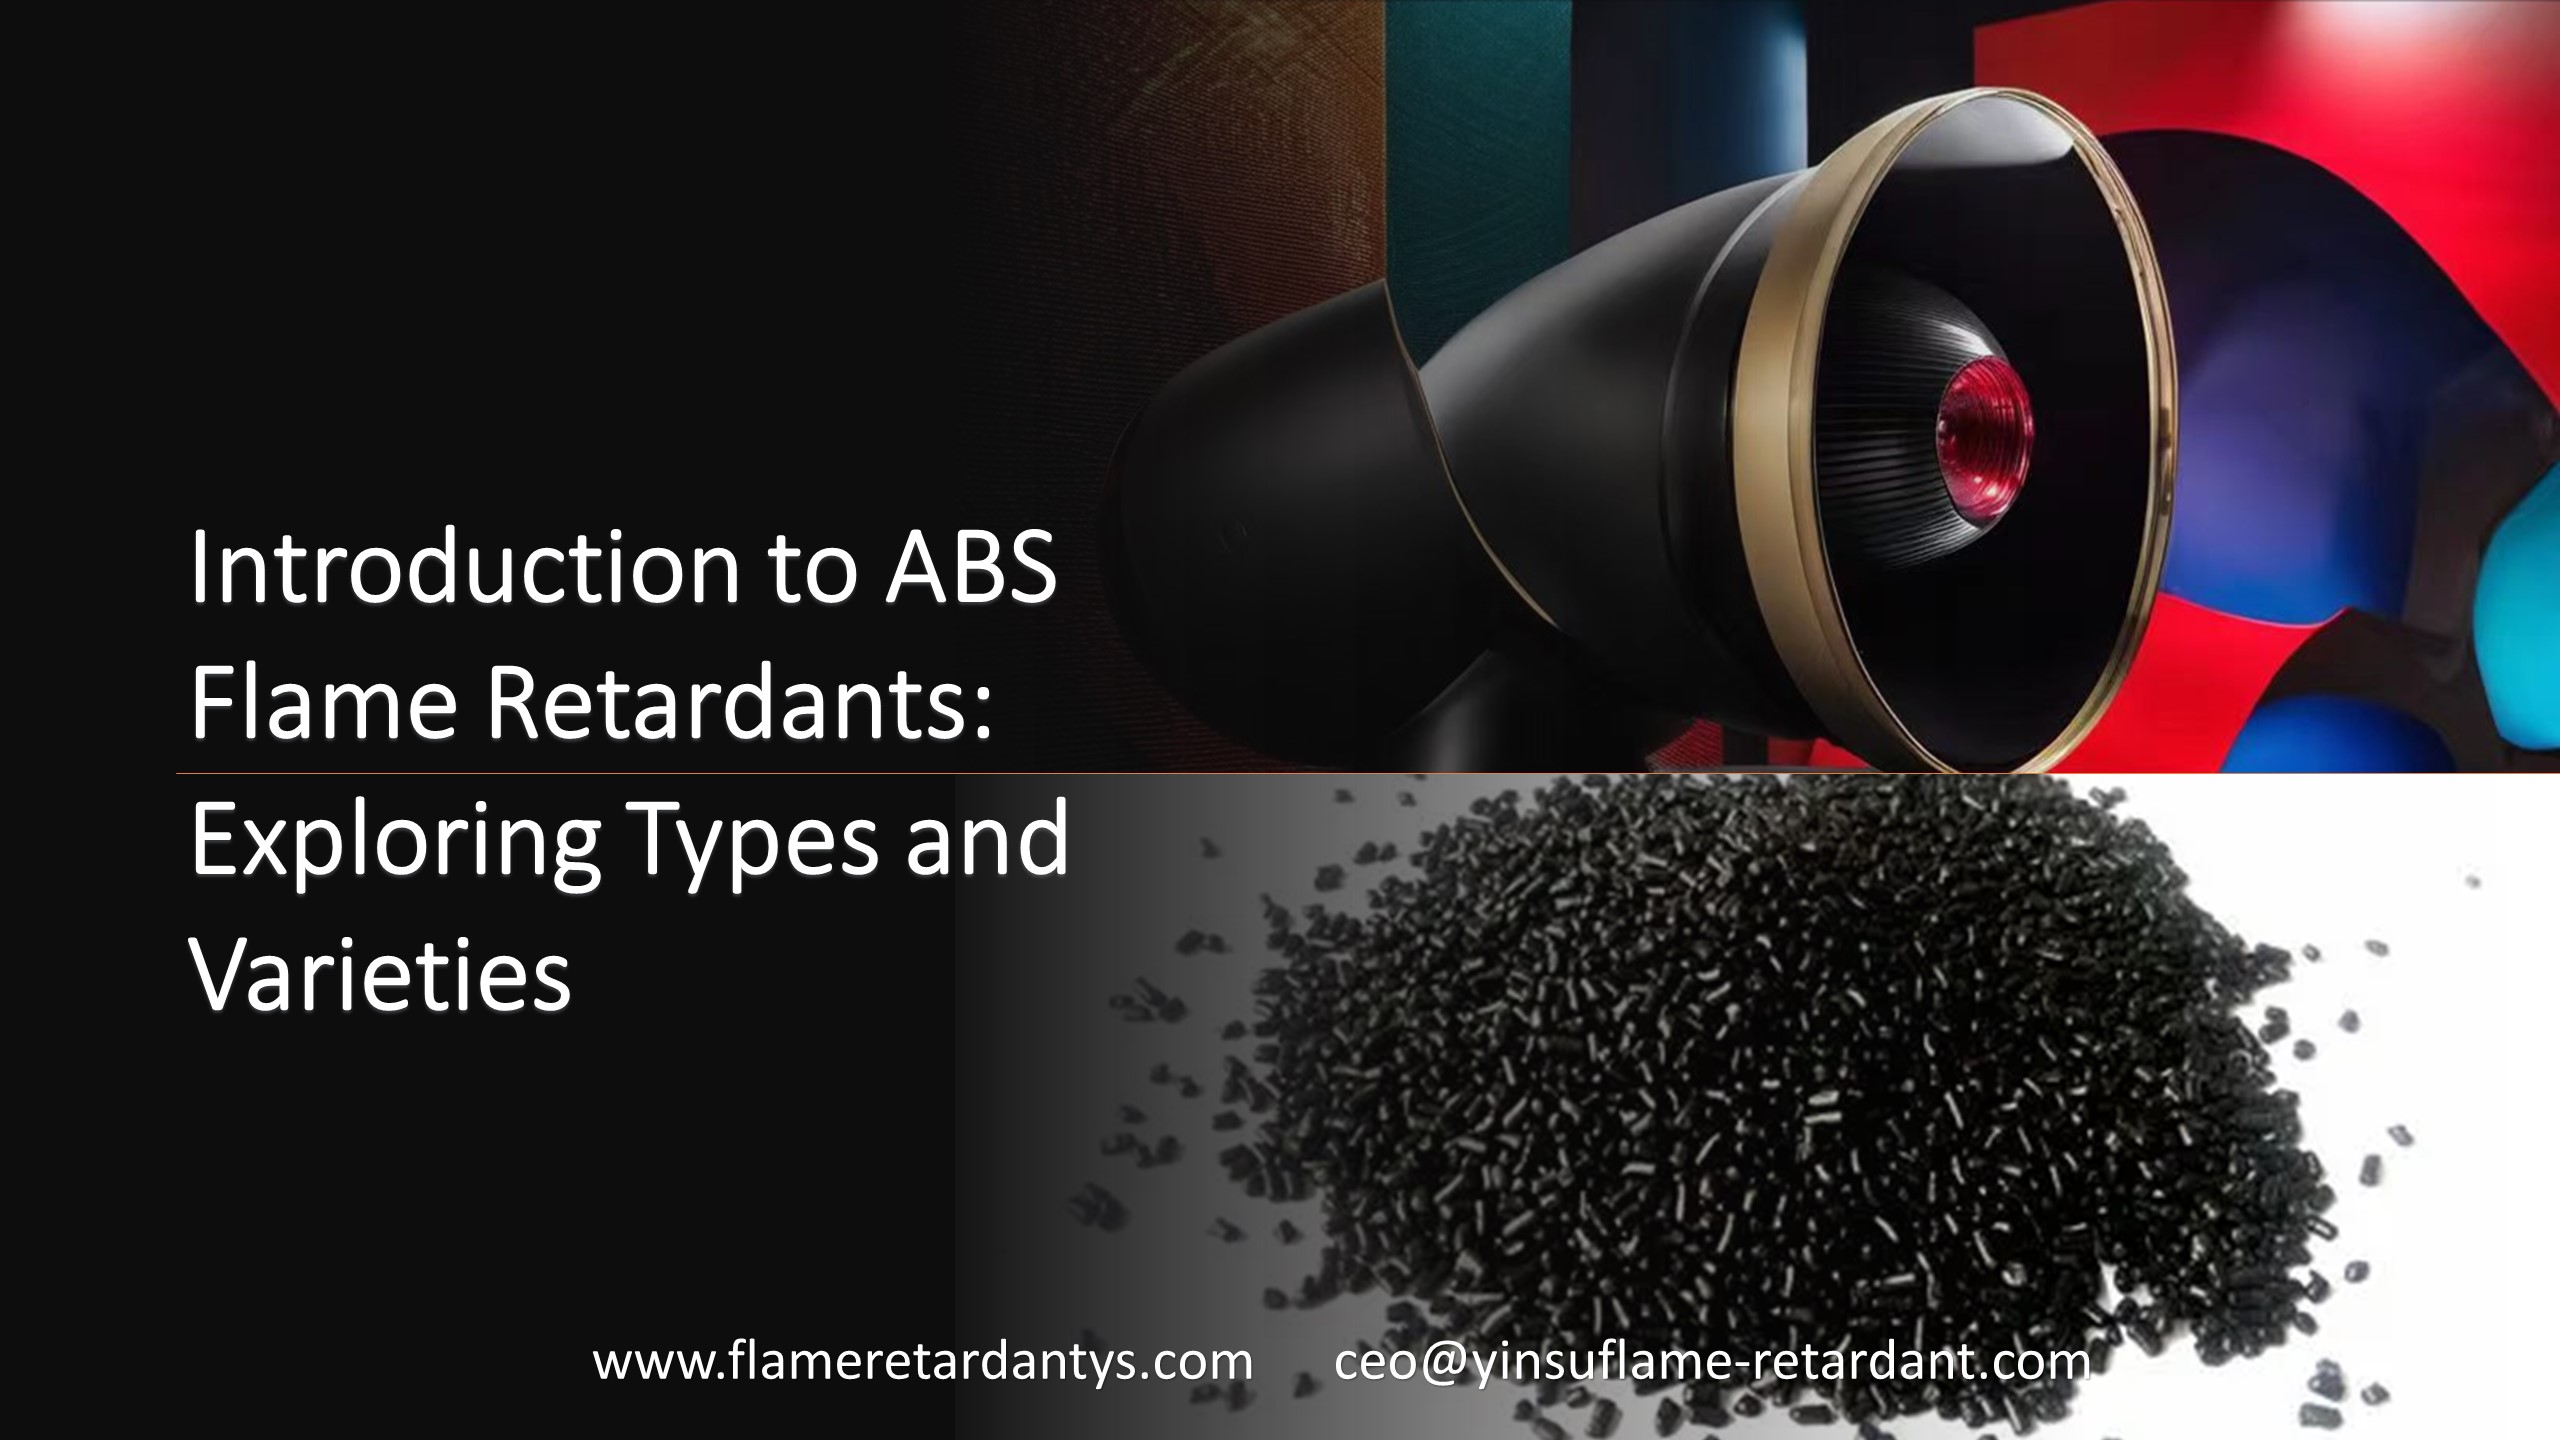 Introduction To ABS Flame Retardants: Exploring Types And Varieties